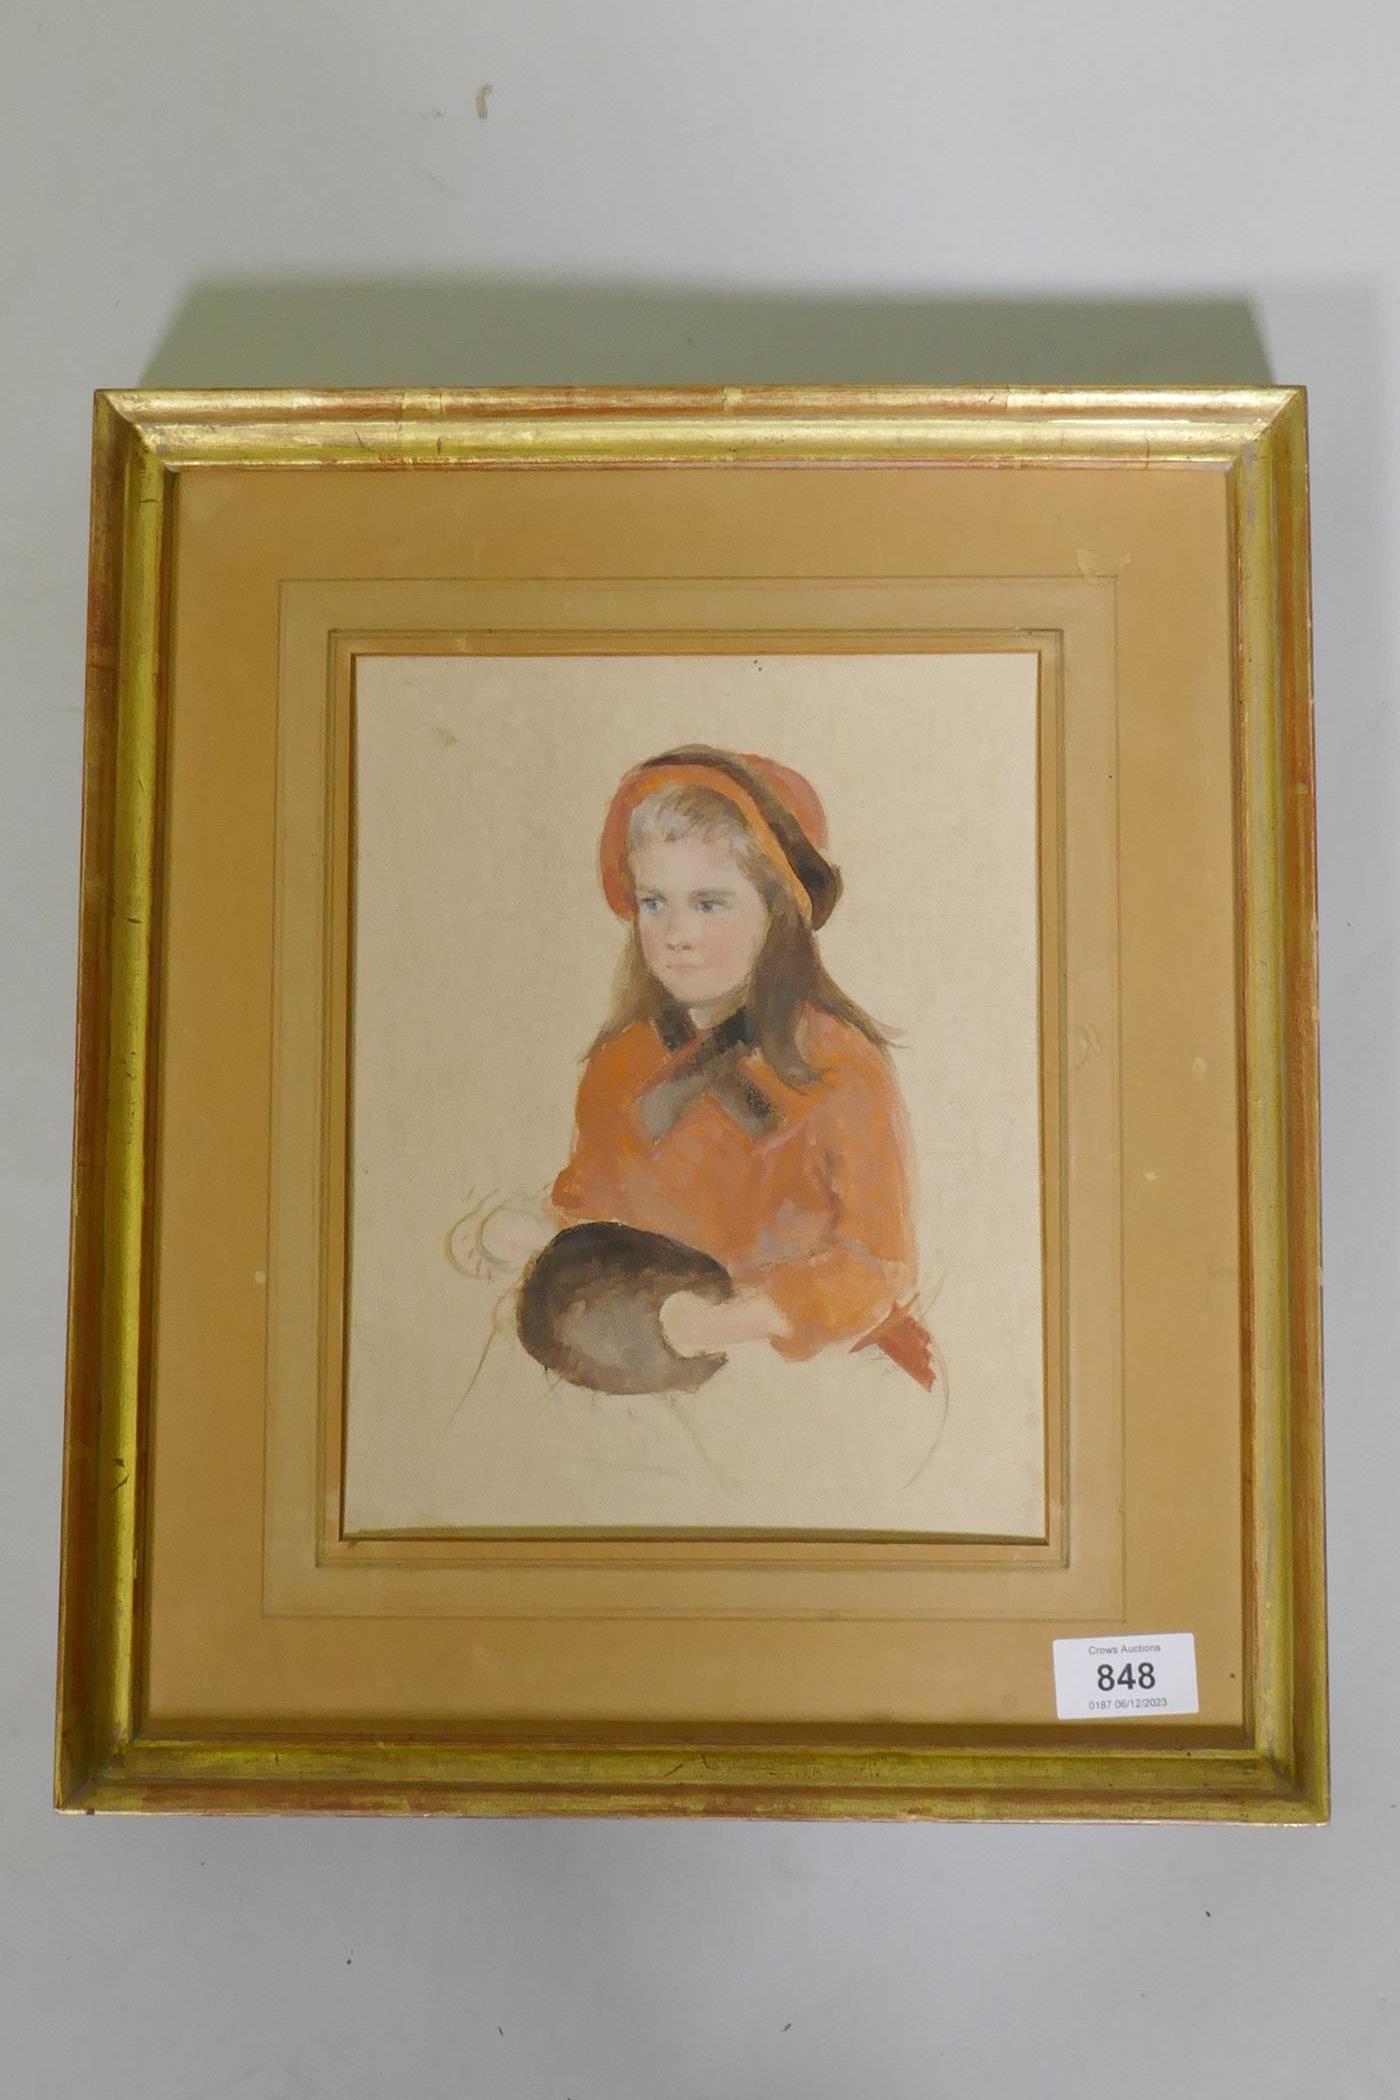 B. Melcher, (American), Allegra, portrait of a young girl, labelled verso, dated 1968, oil on canvas - Image 2 of 3